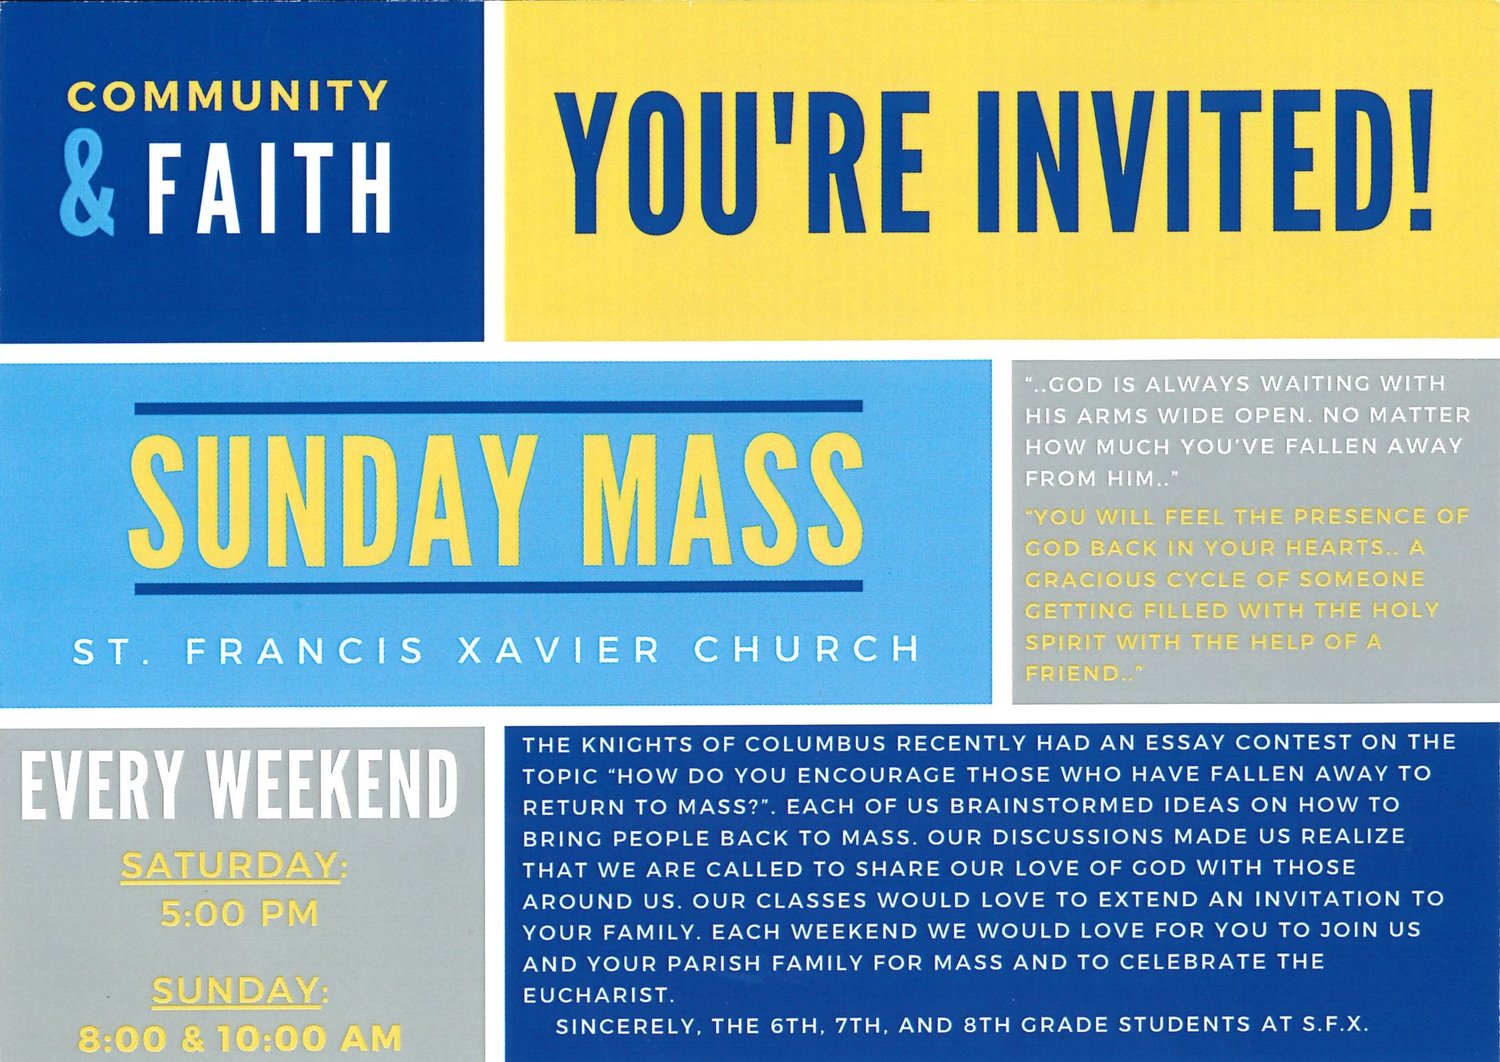 This is the front of the invitation the middle-schoolers at St. Francis Xavier School in Taos mailed to fellow parishioners to remind them of the importance of getting to Mass.